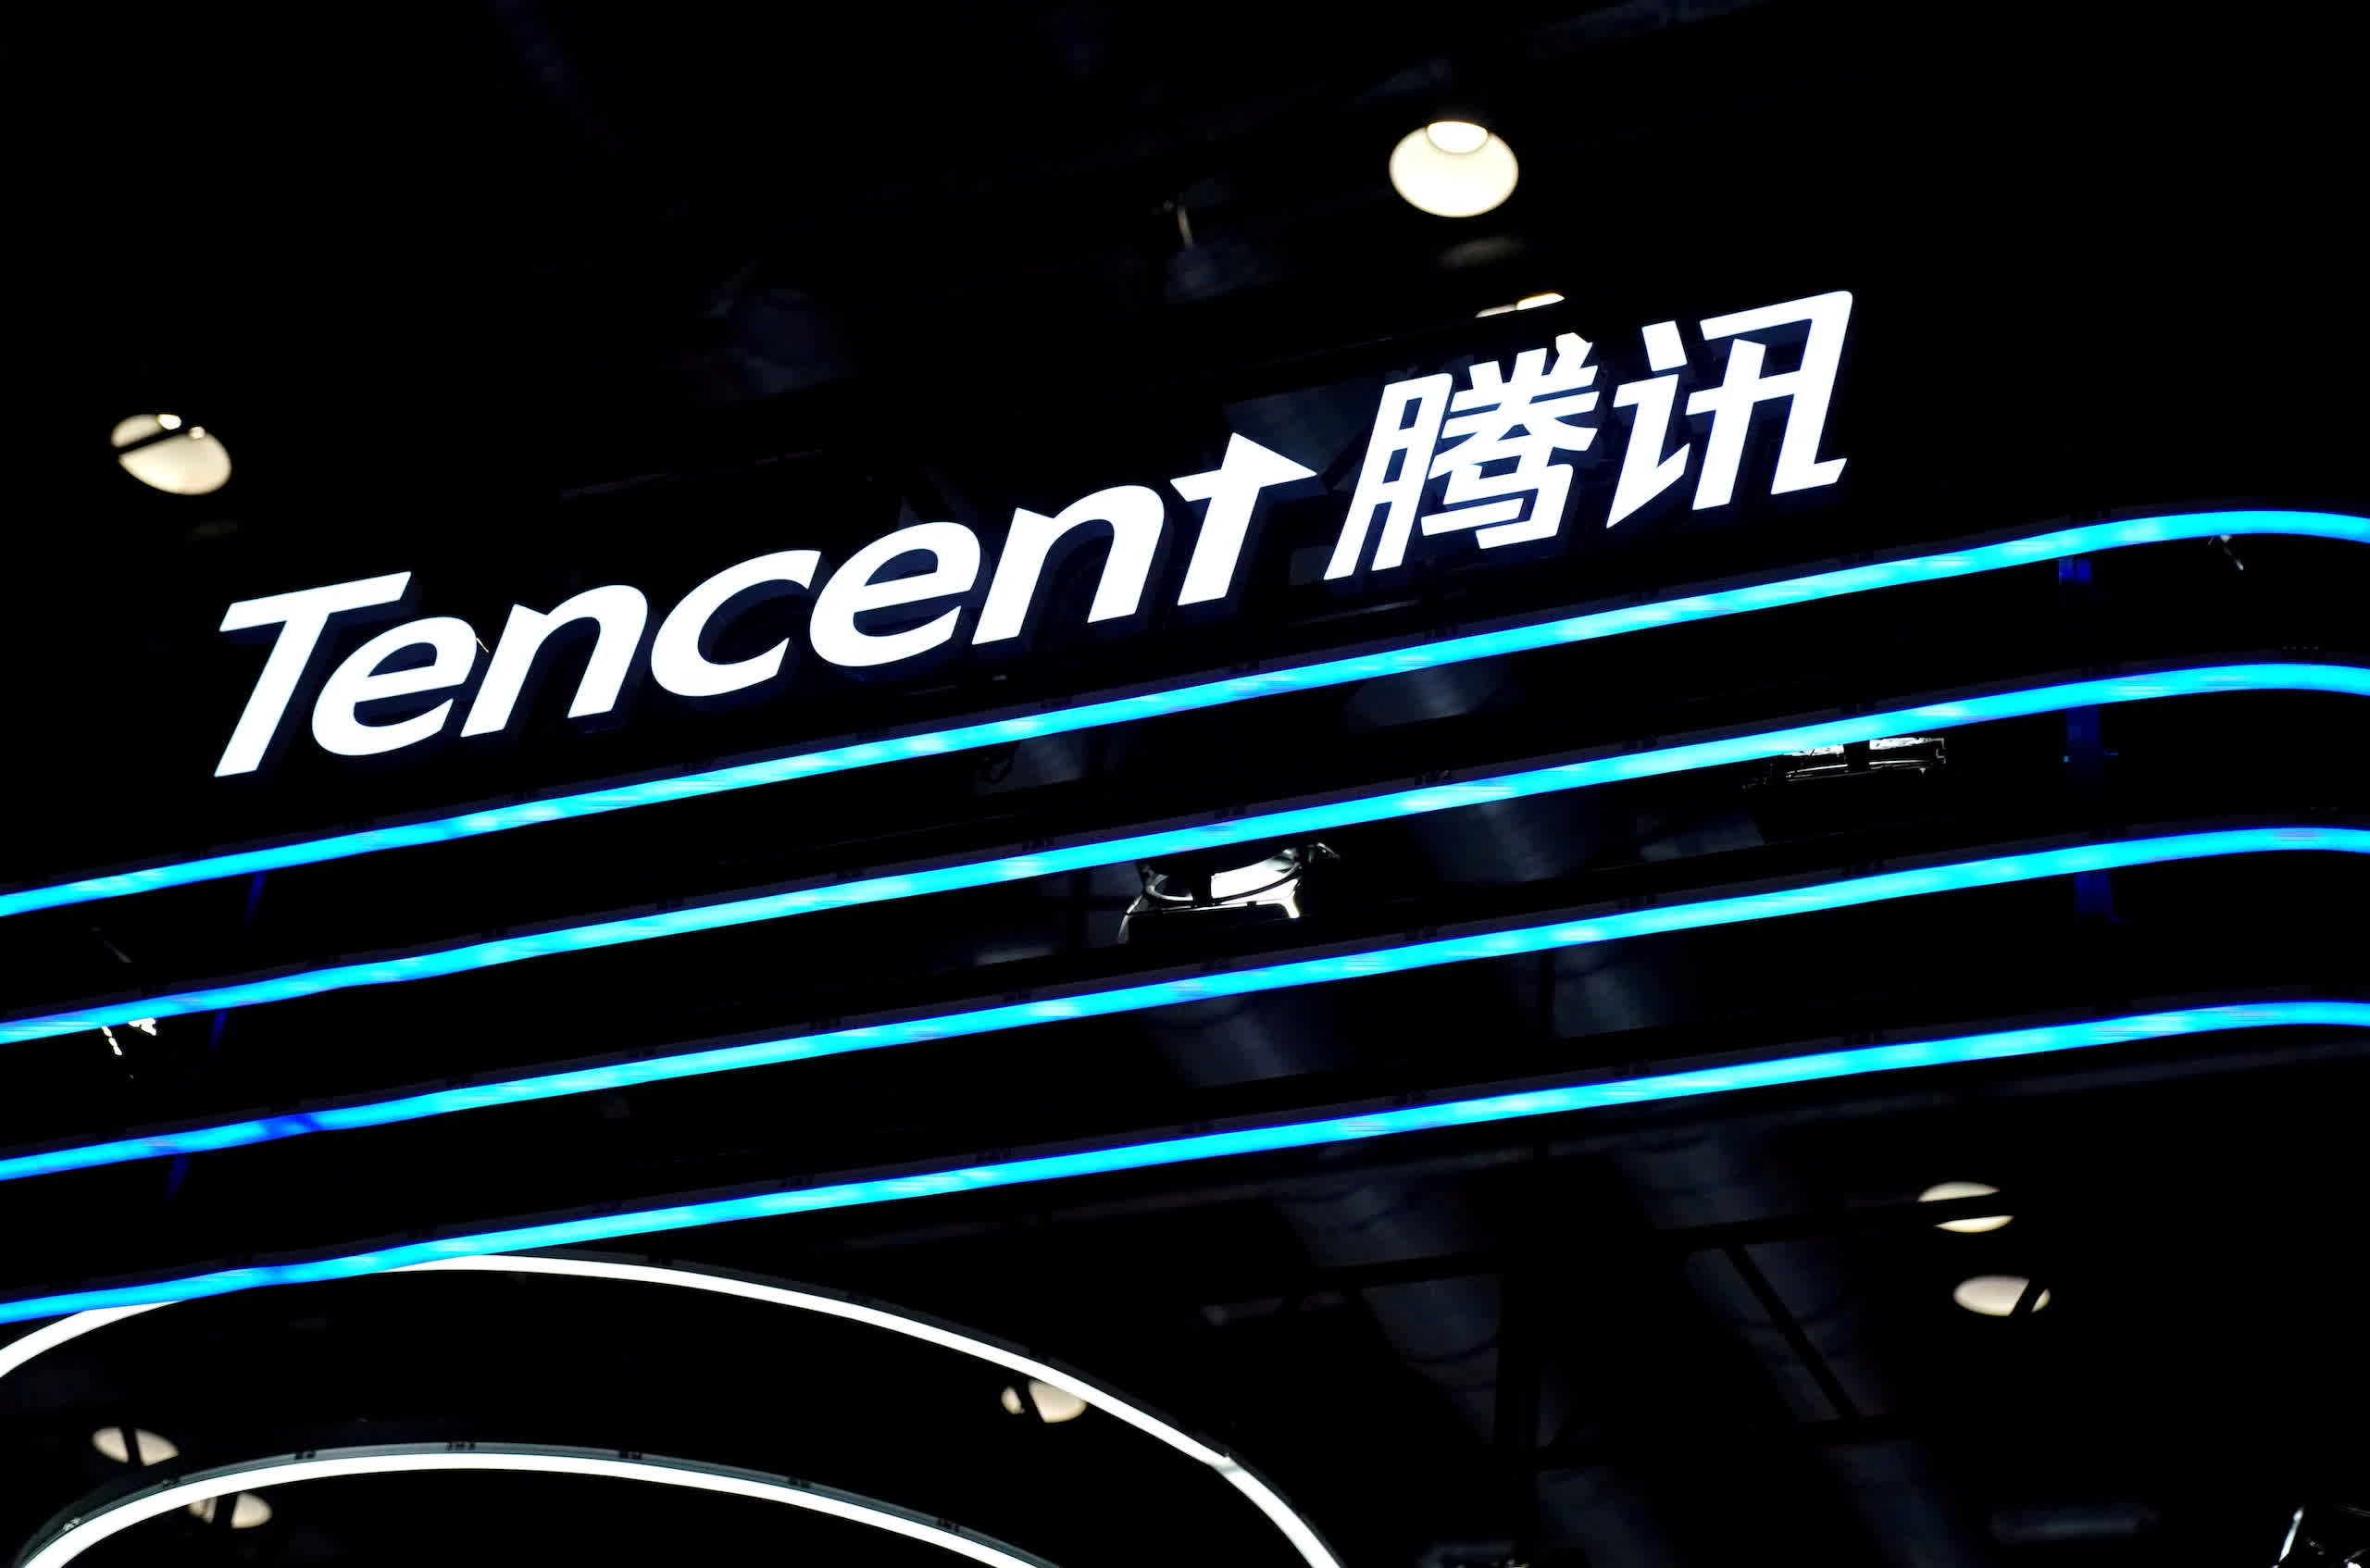 Tencent launches three custom Arm-based chips, signaling expansion beyond video games and social media